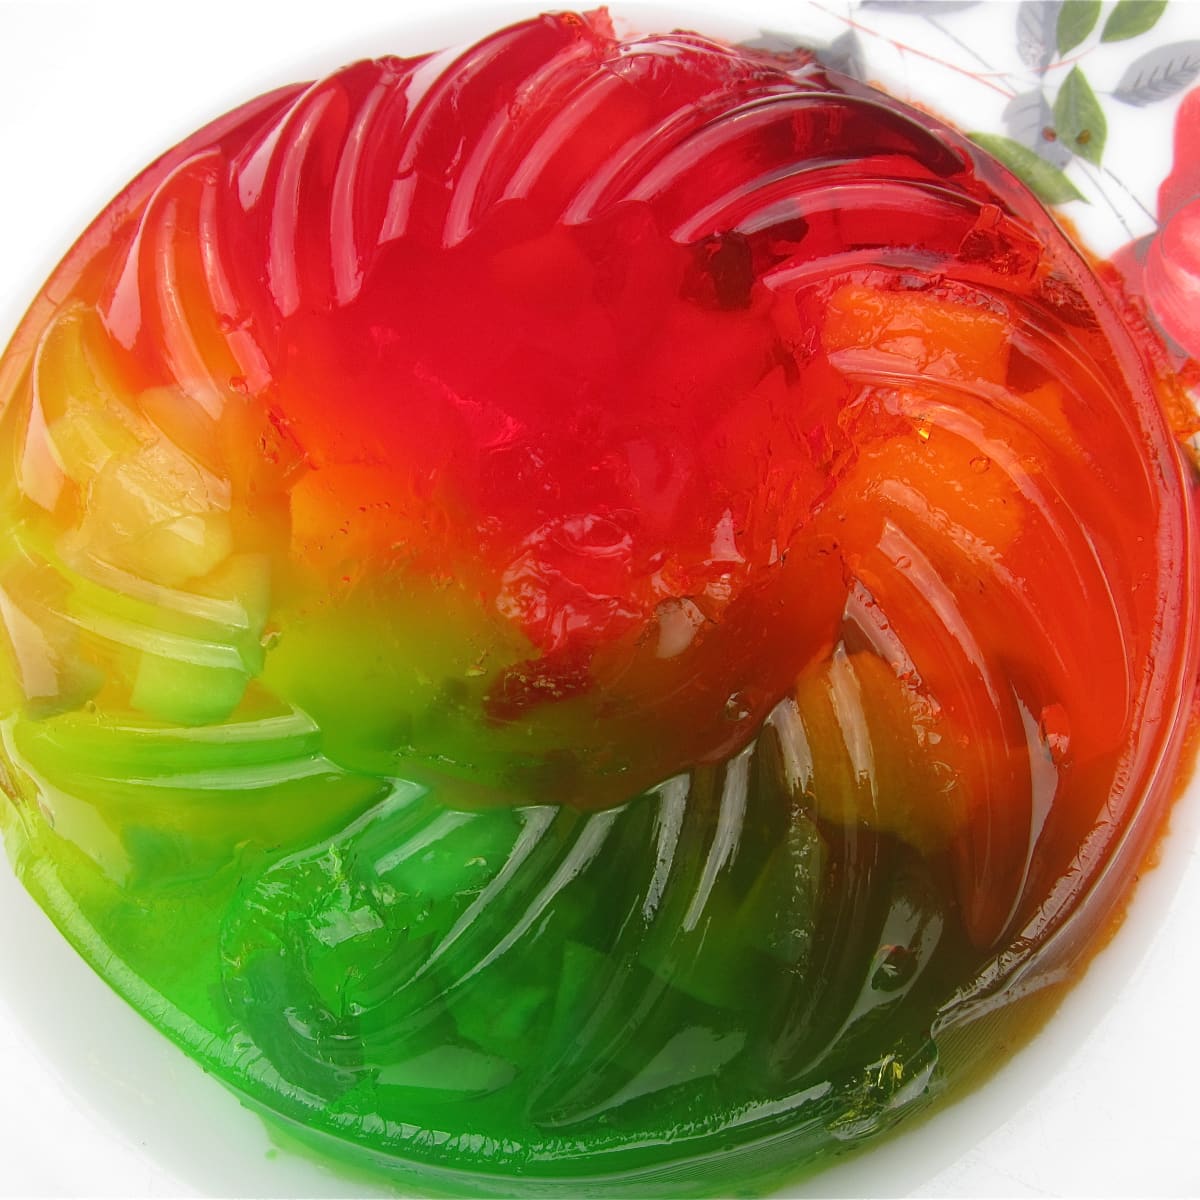 Gelatin: Production, Properties, Food Applications & Other Uses - Delishably